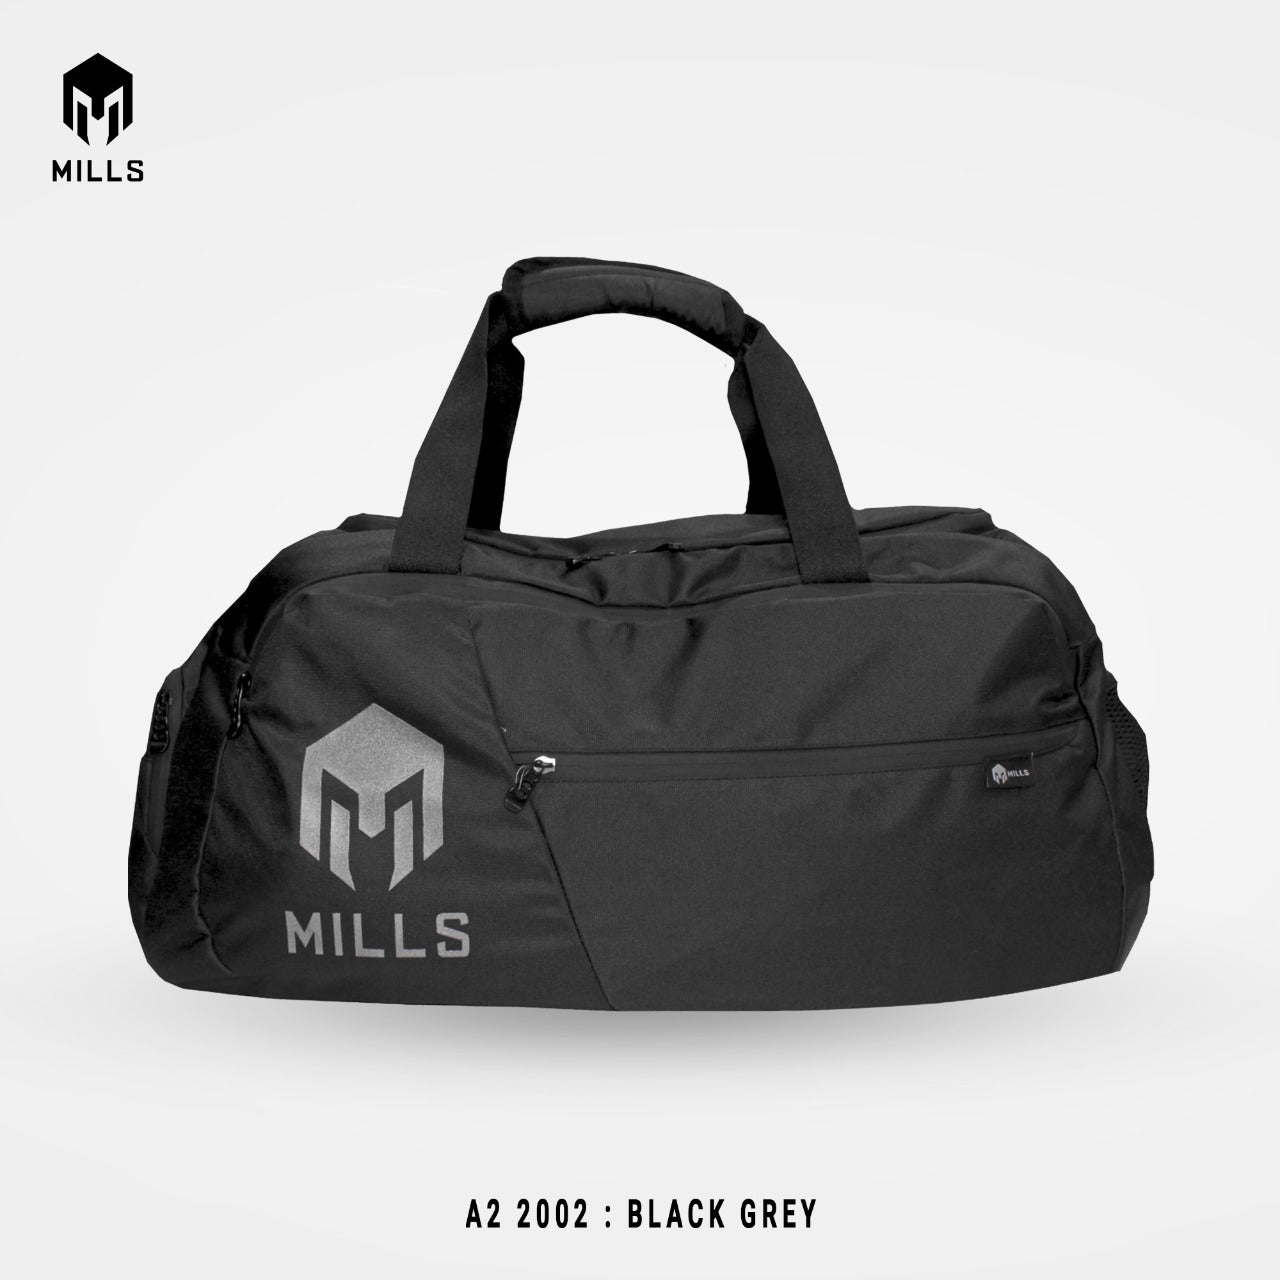 MILLS TRAVELLING BAGS A2 2002 BLACK